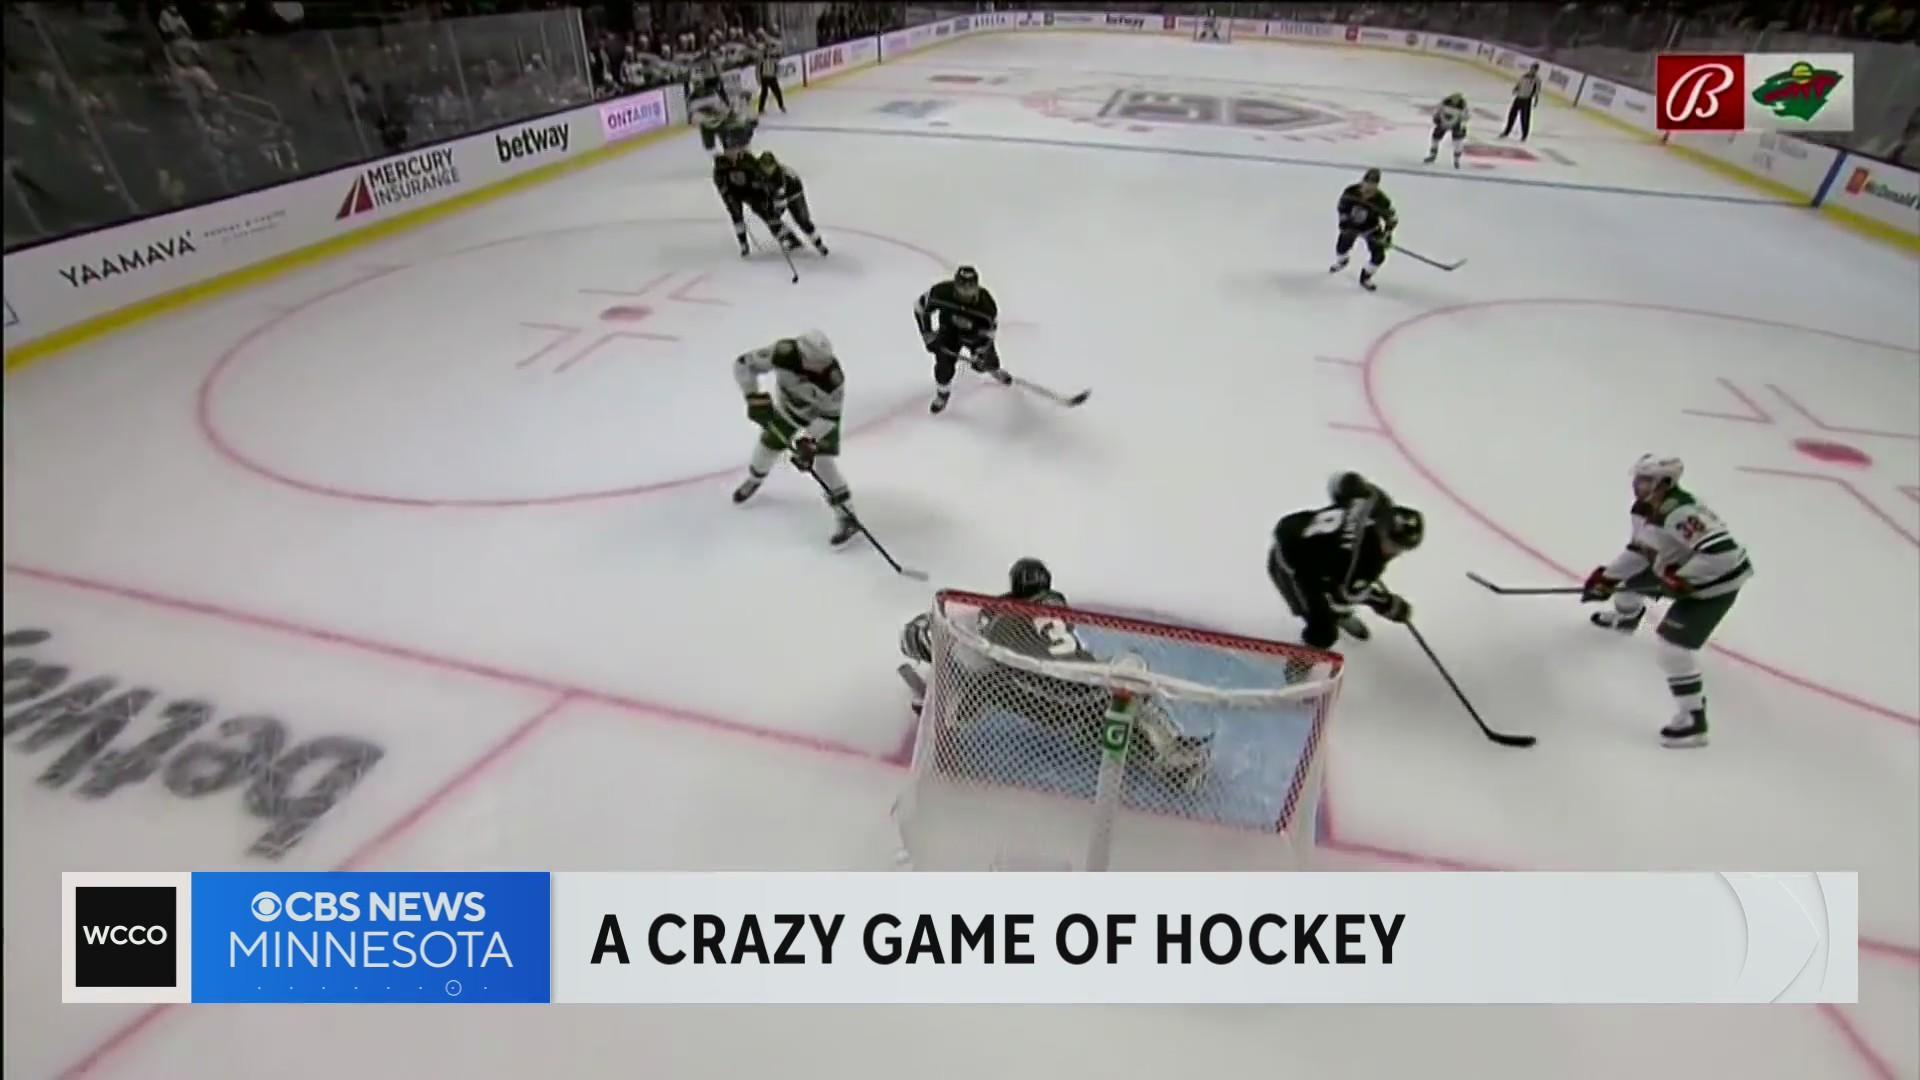 Some sights and sounds from this weekend's Crazy Game of Hockey